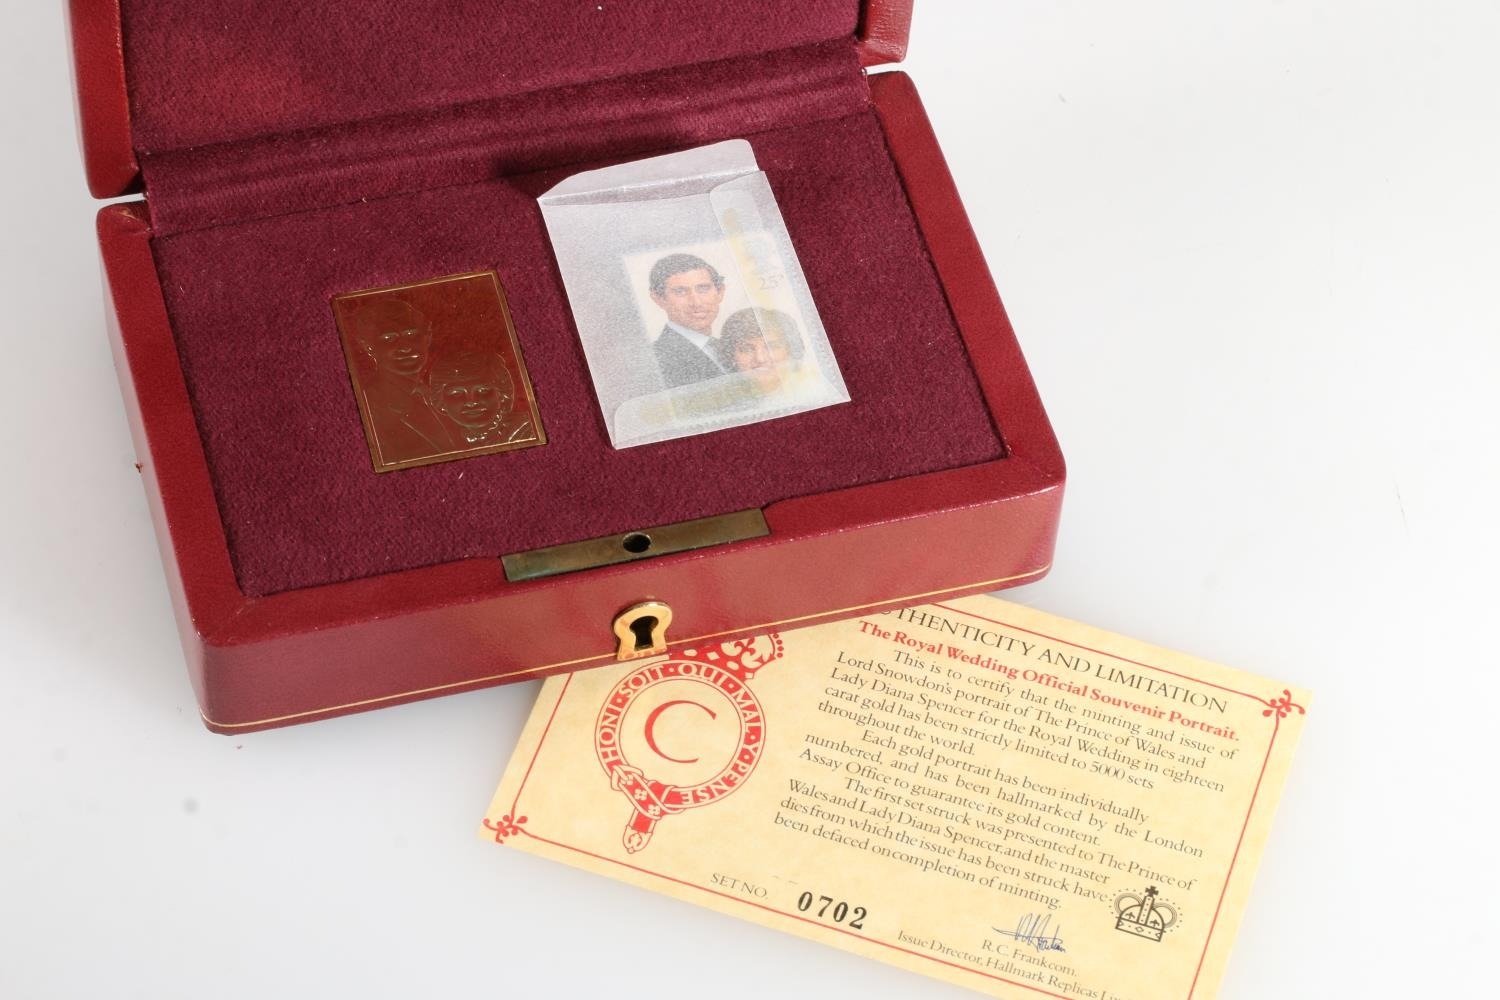 Hallmark Replicas Limited The Coronation Issue 18ct gold proof stamp ingot of Lord Snowdon's